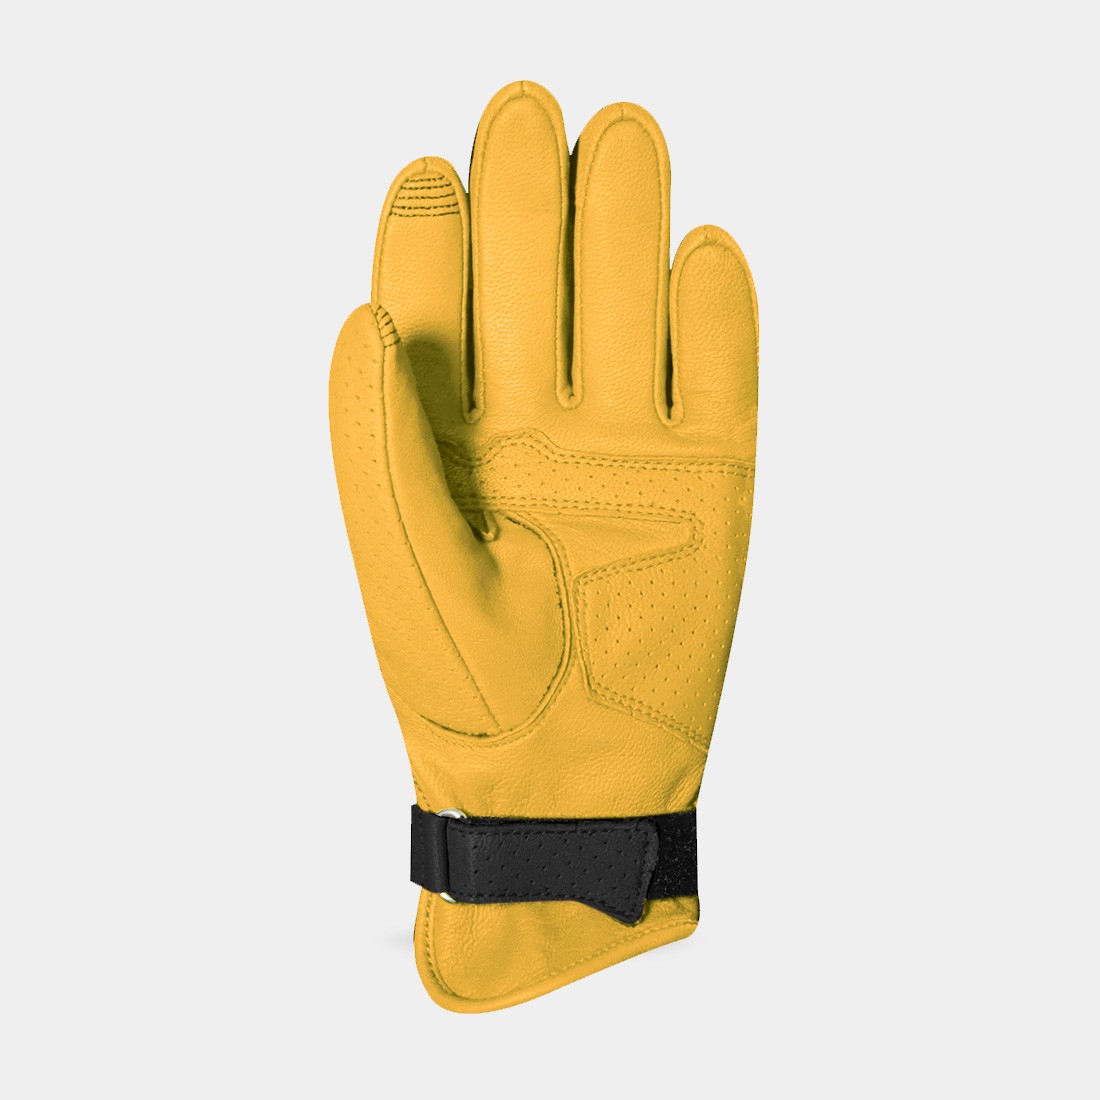 SHIRLEY - MOTORCYCLE GLOVES